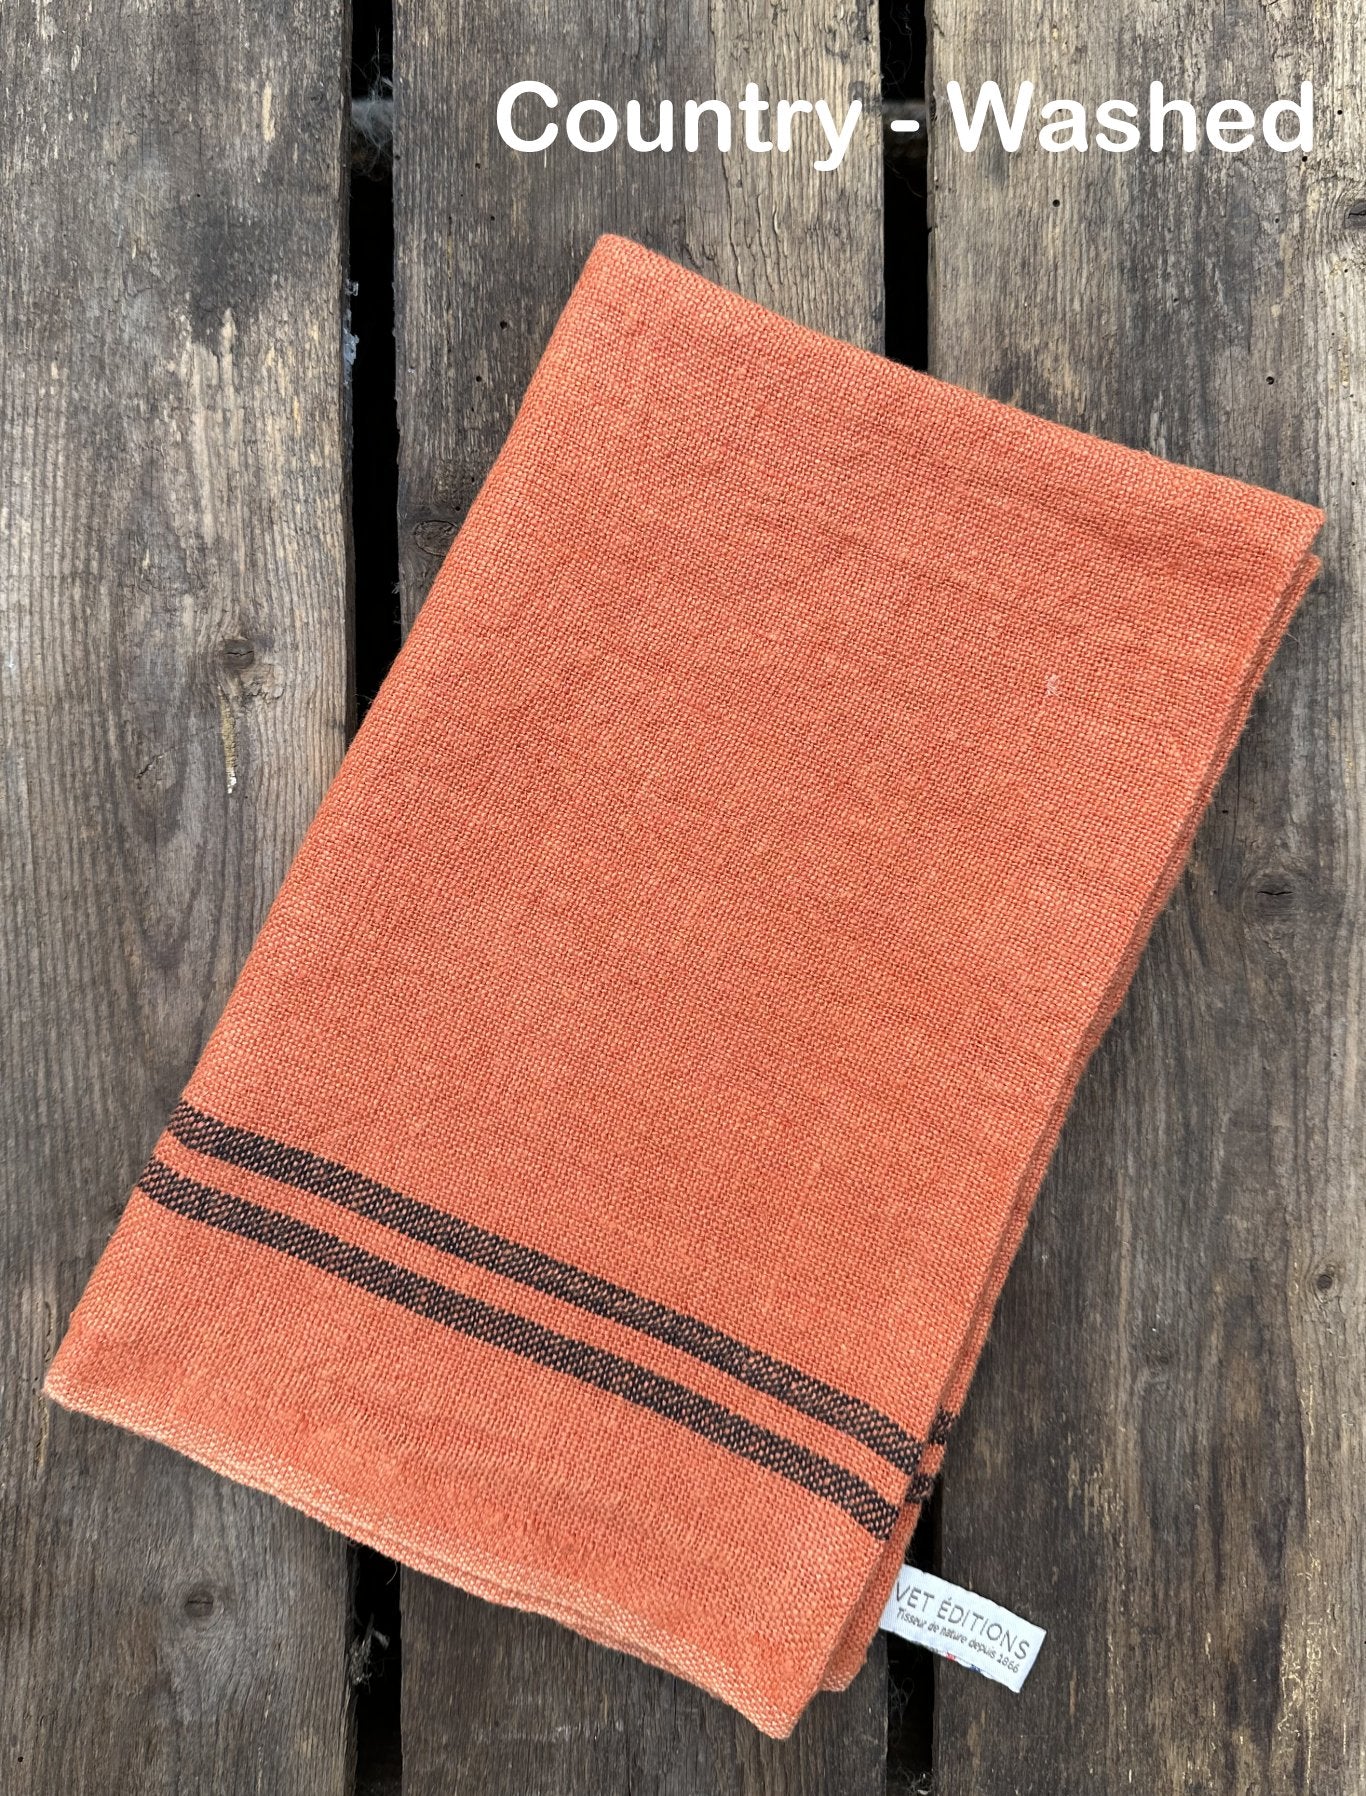 Charvet Editions "Country Washed & Dyed" (Carotte), Natural woven linen tea towel. Made in France.